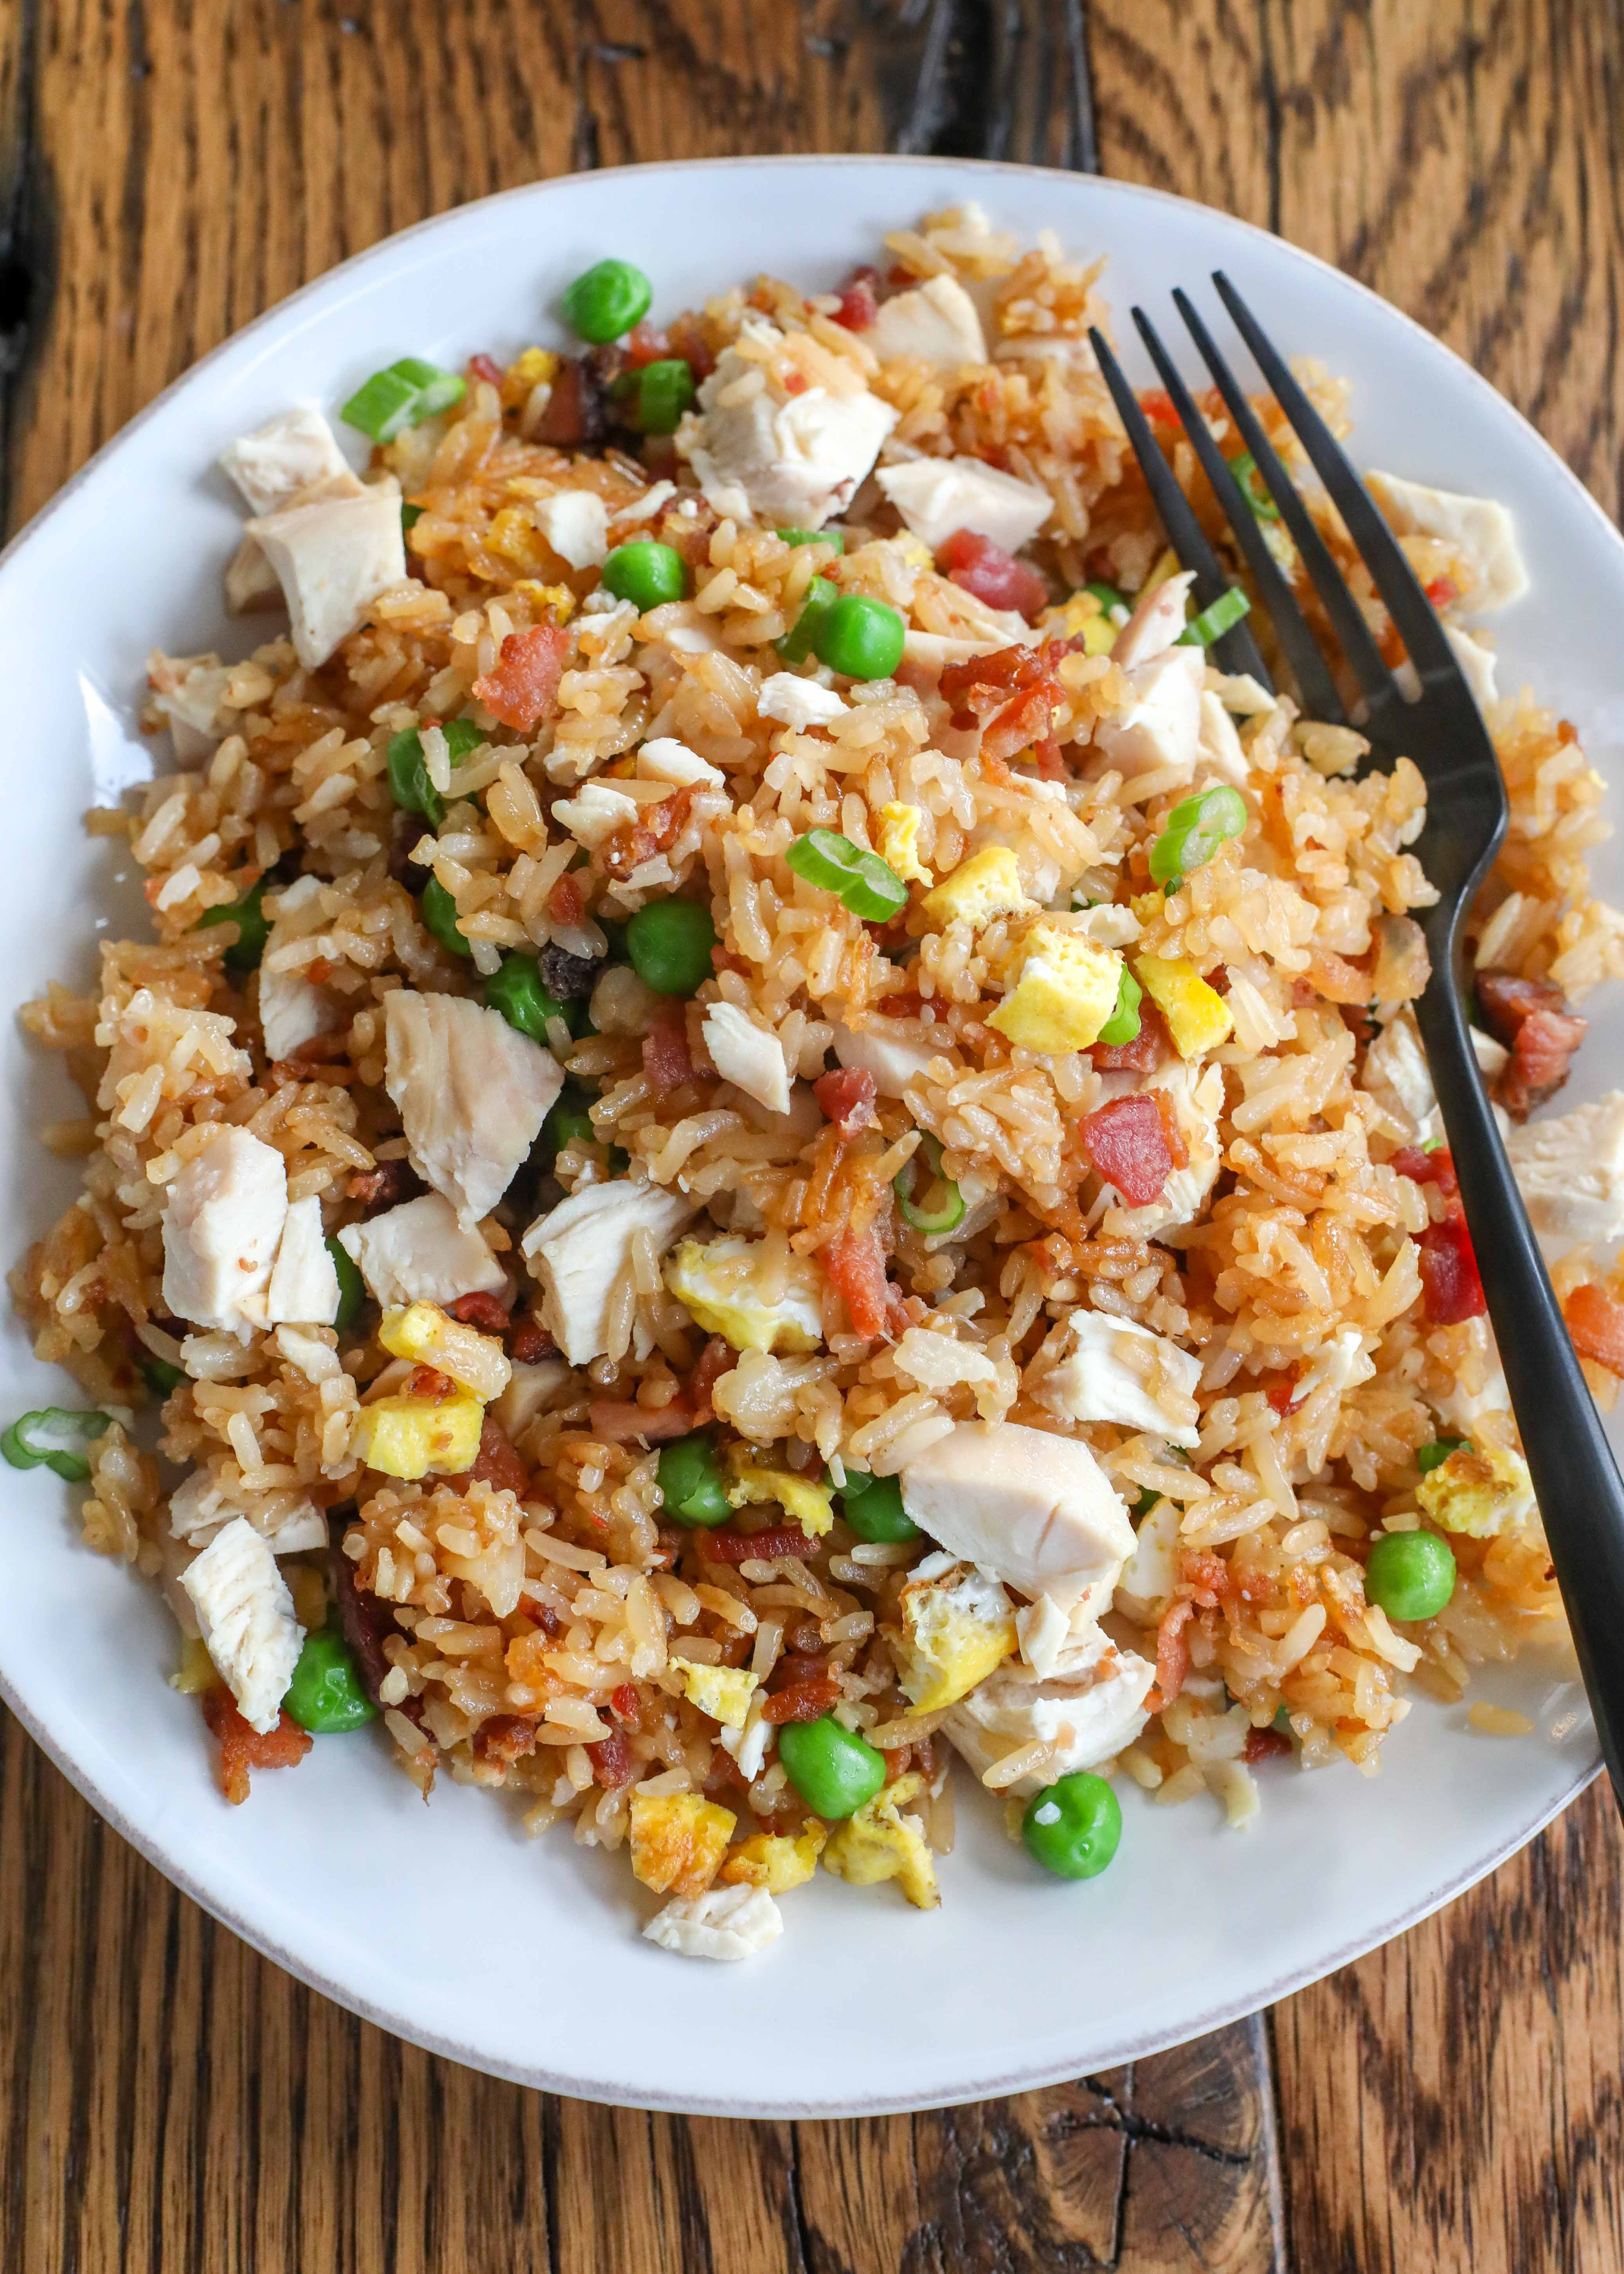 https://barefeetinthekitchen.com/wp-content/uploads/2025/10/chicken-and-bacon-fried-rice-9-1-of-1.jpg